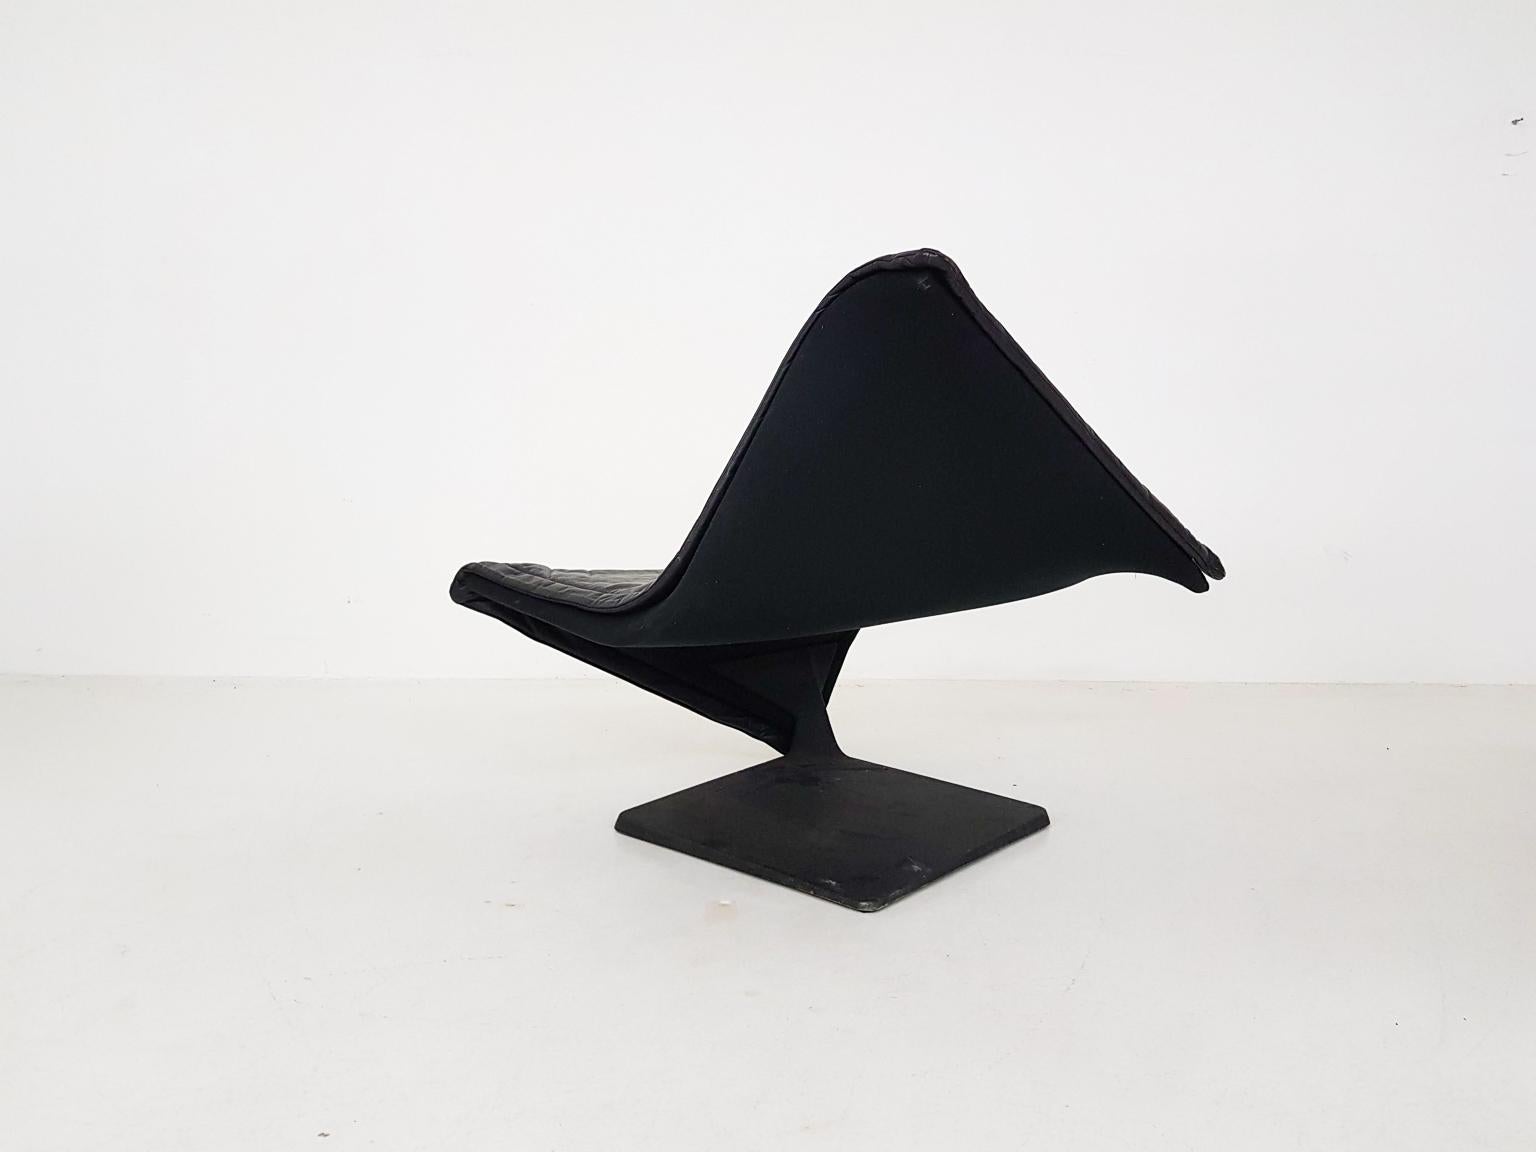 Leather lounge chair by German designer Simon Desanta and produced by Rosenthal Germany in the 1980s.

Become Aladdin in your own lounge chair! This chair is obviously called flying carpet because of its design. The black leather 